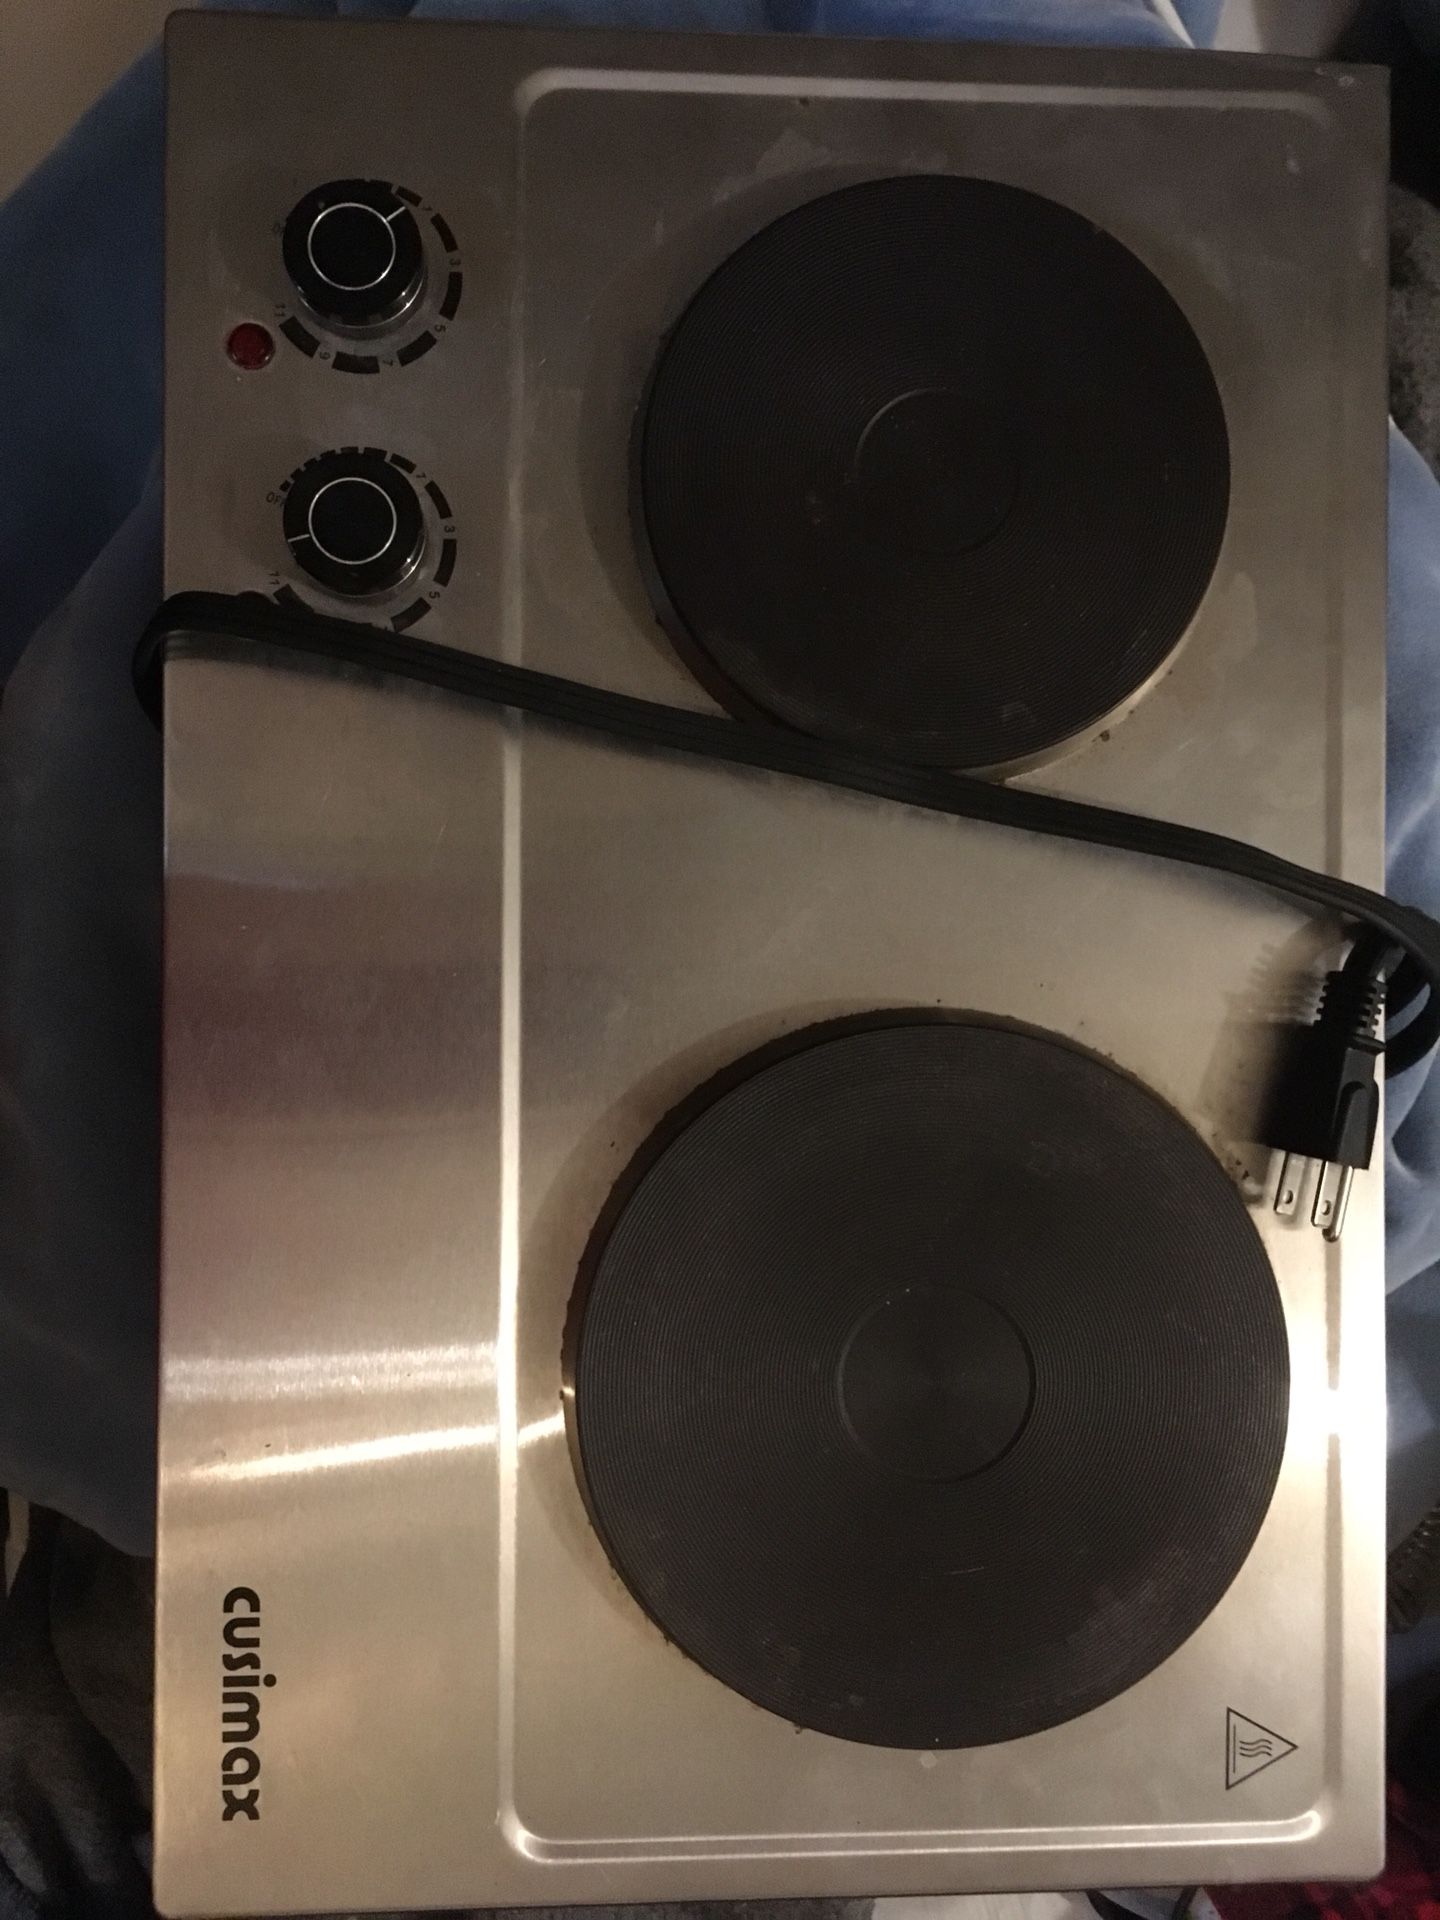 HEAVY DUTY DUAL BURNER INDUCTION COOKTOP